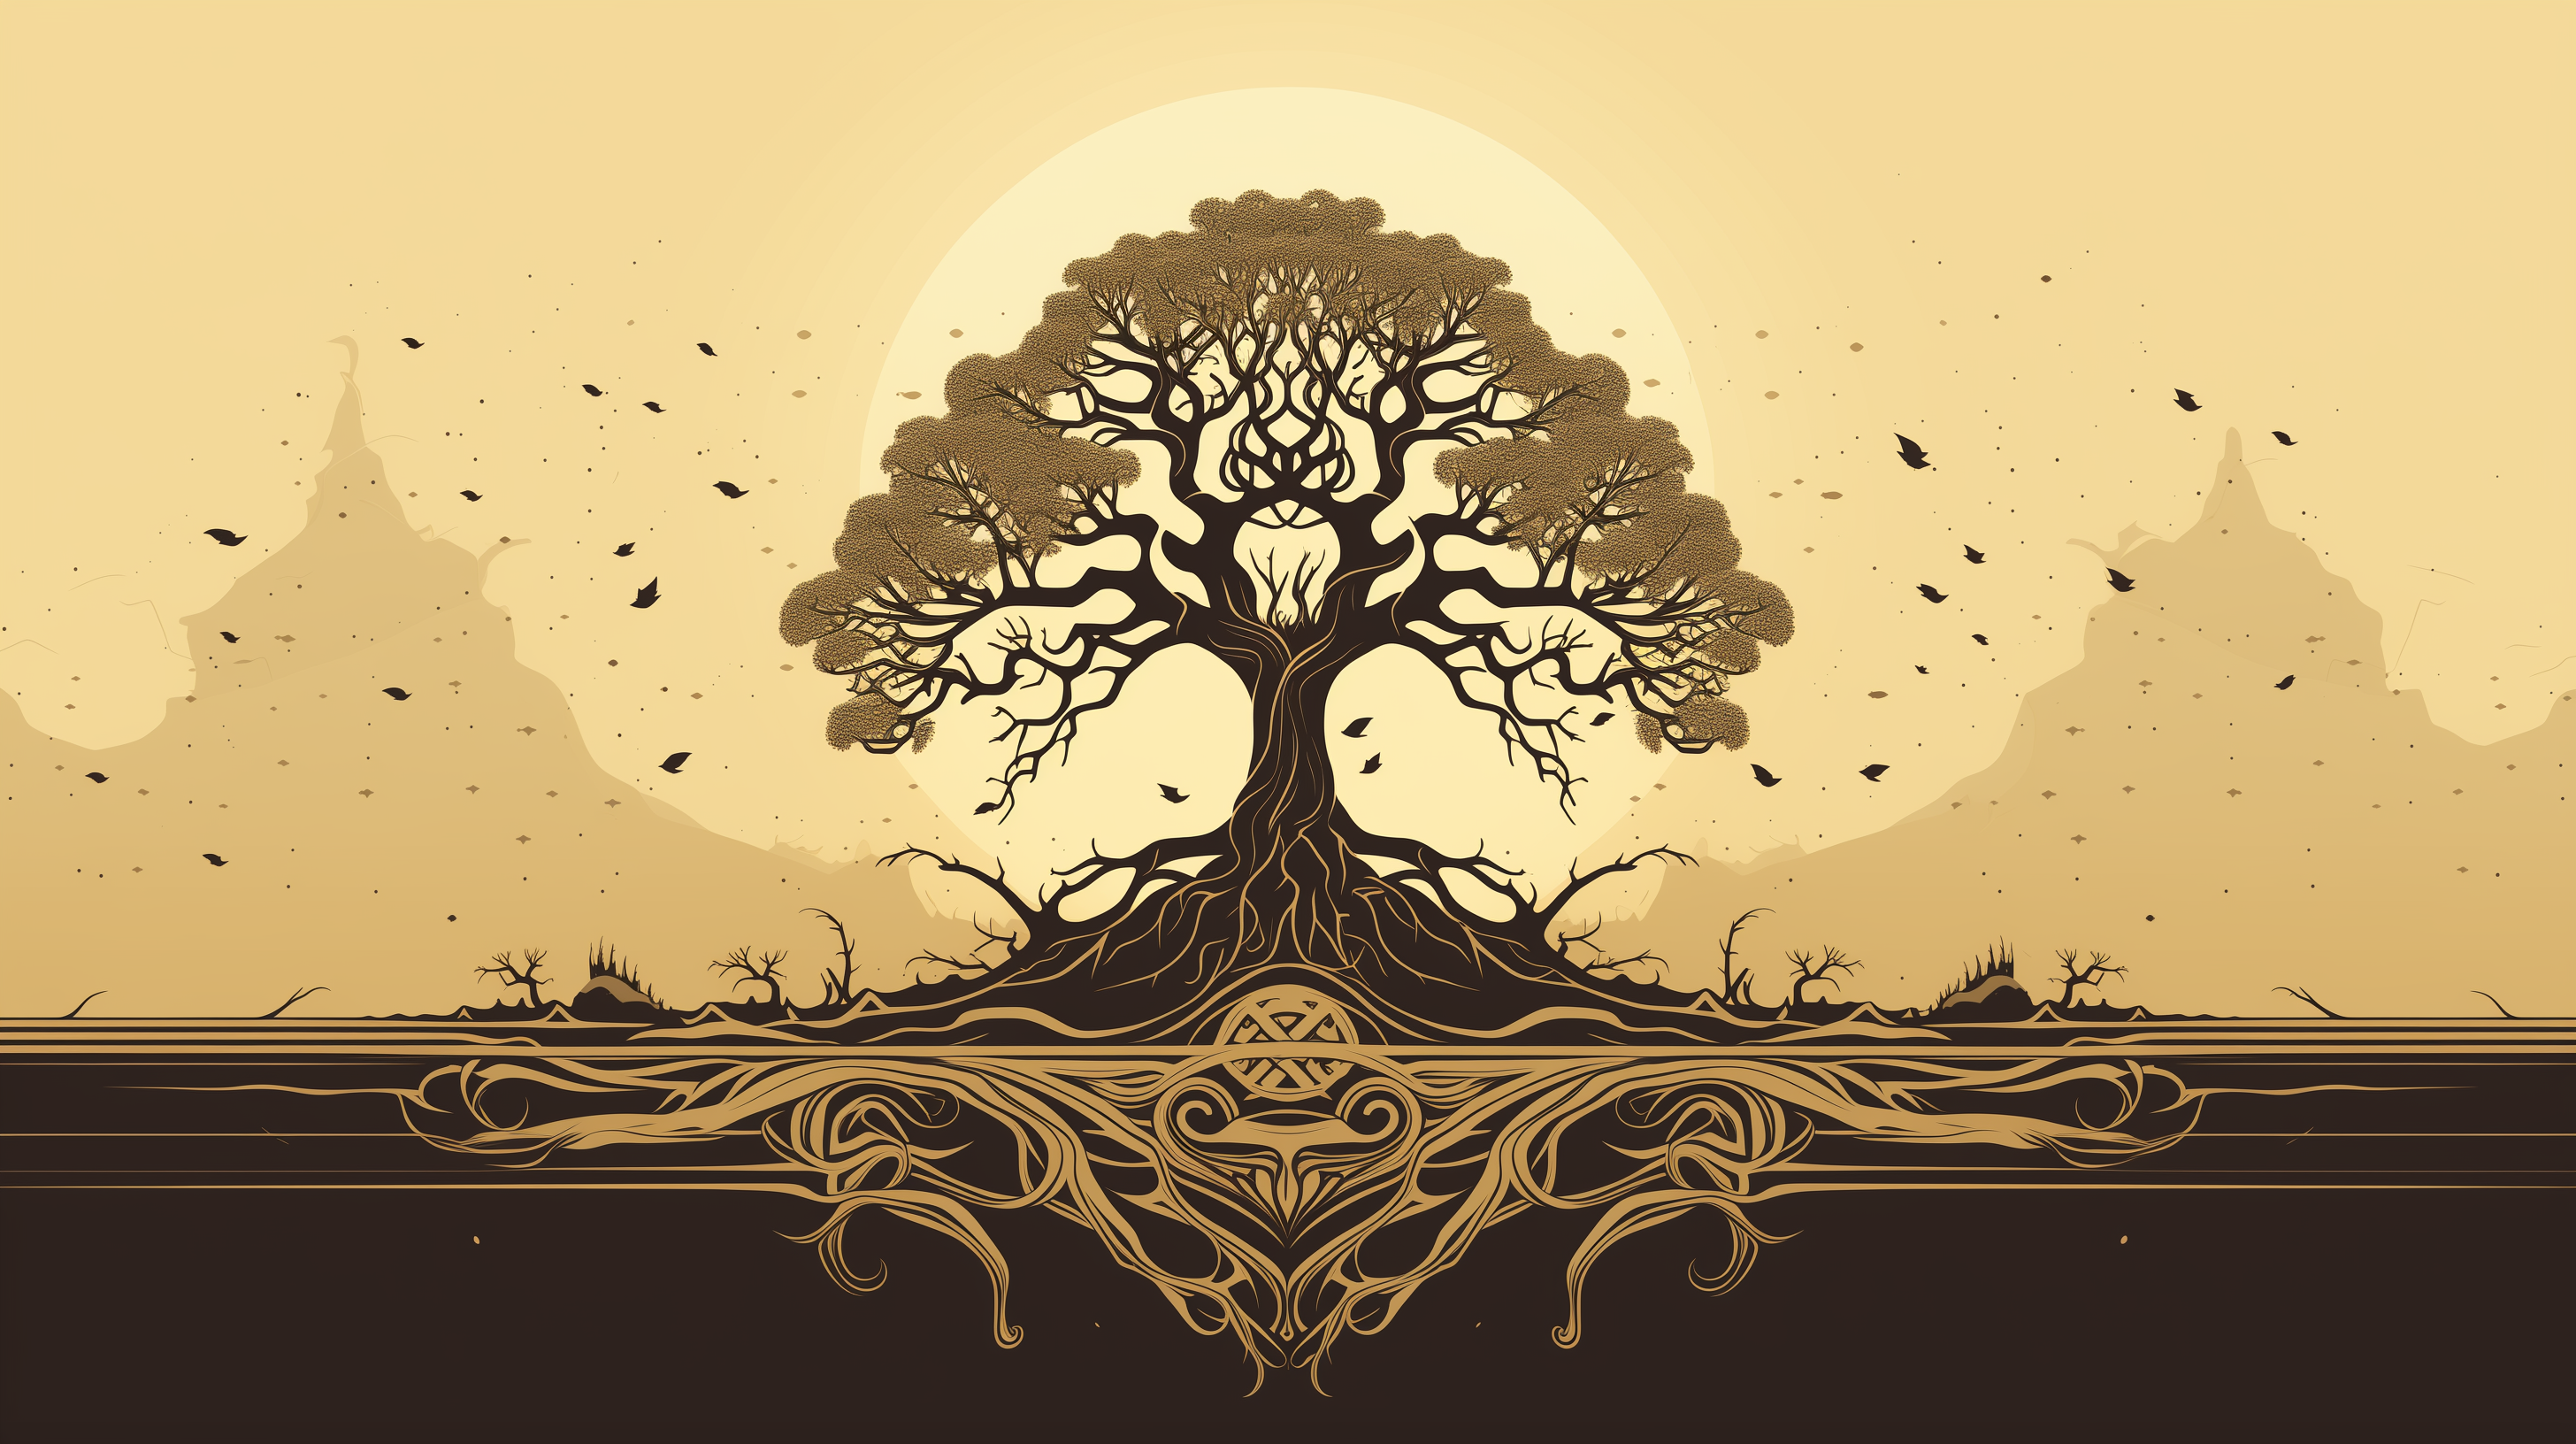 HD desktop wallpaper featuring the mythical Yggdrasil tree with a golden sun backdrop and intricate Norse patterns.